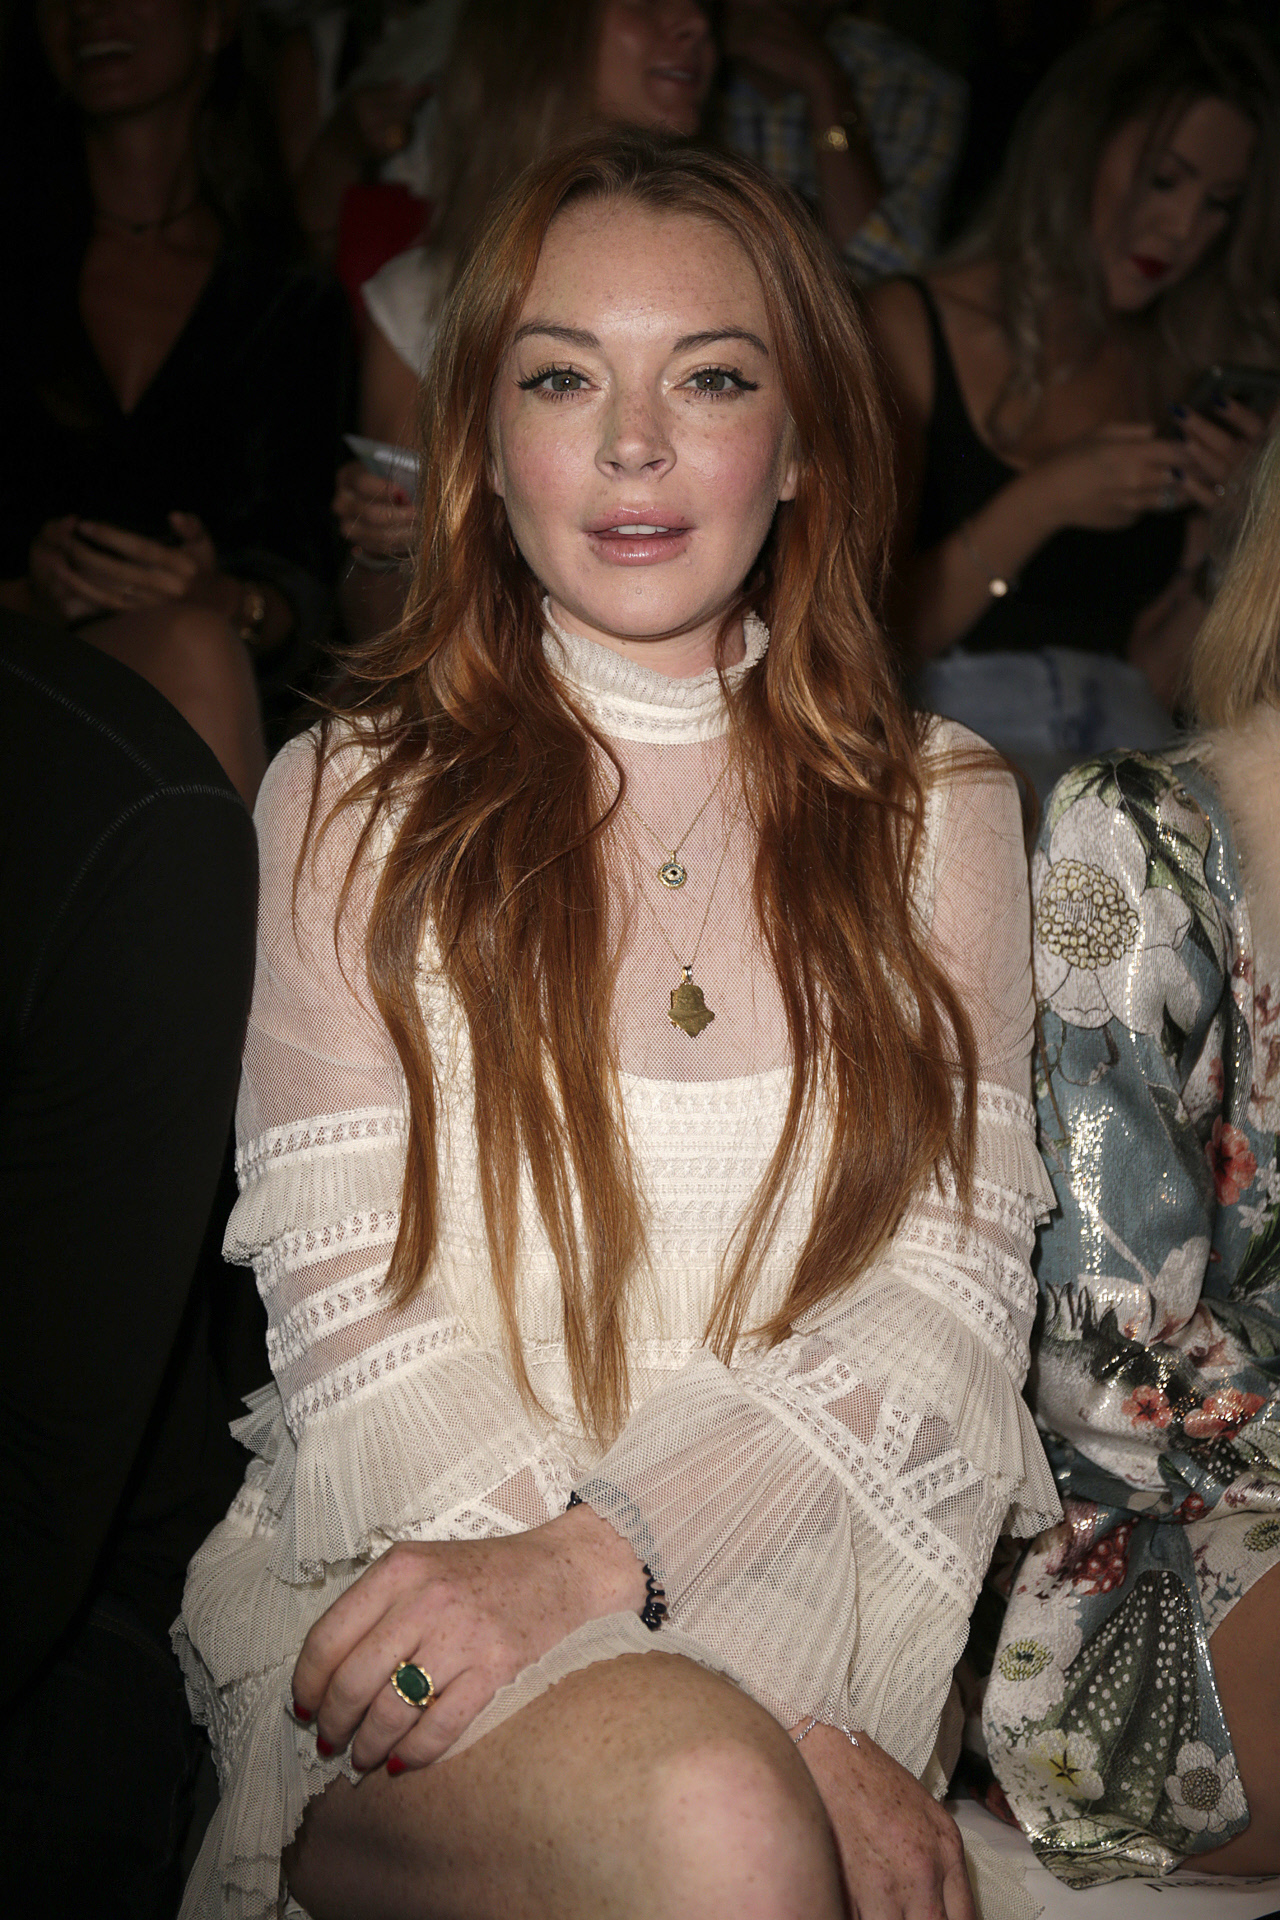 What Happened To Lindsay Lohan The Bad Girl Of Hollywood